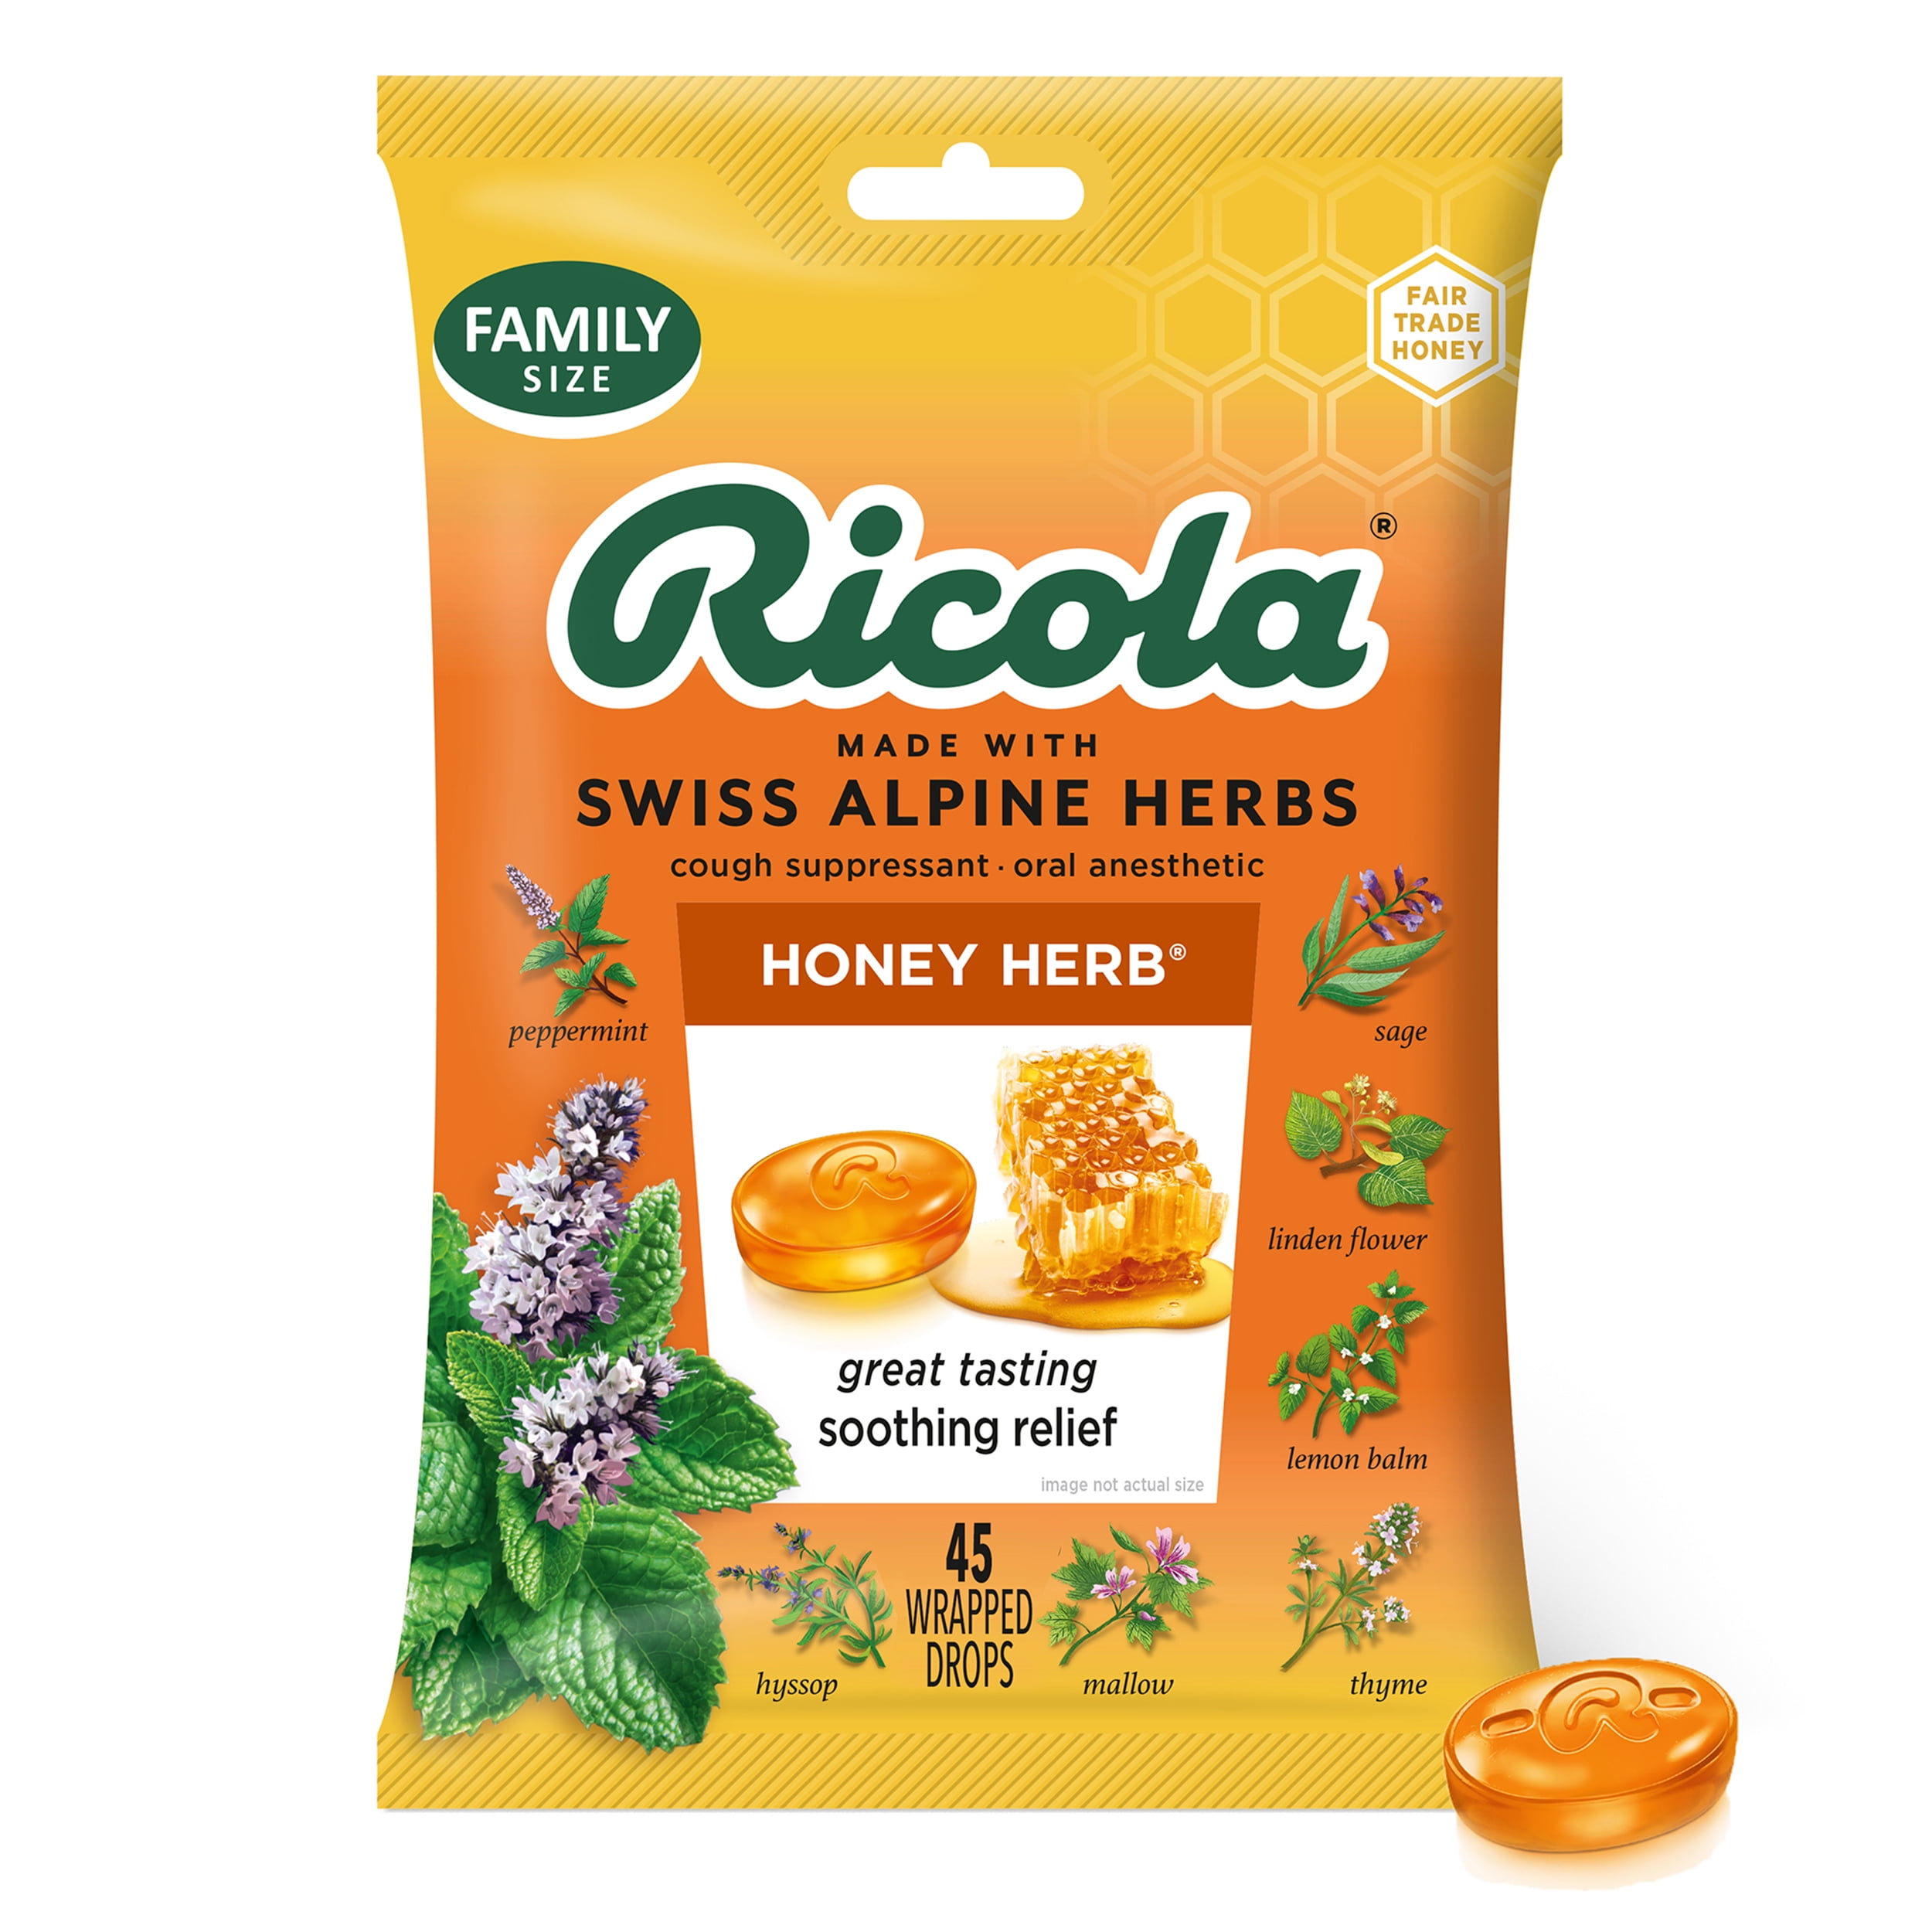 Ricola Cough Drops, Soothing Relief for Dry, Sore Throat, Honey Herb, 45 Count